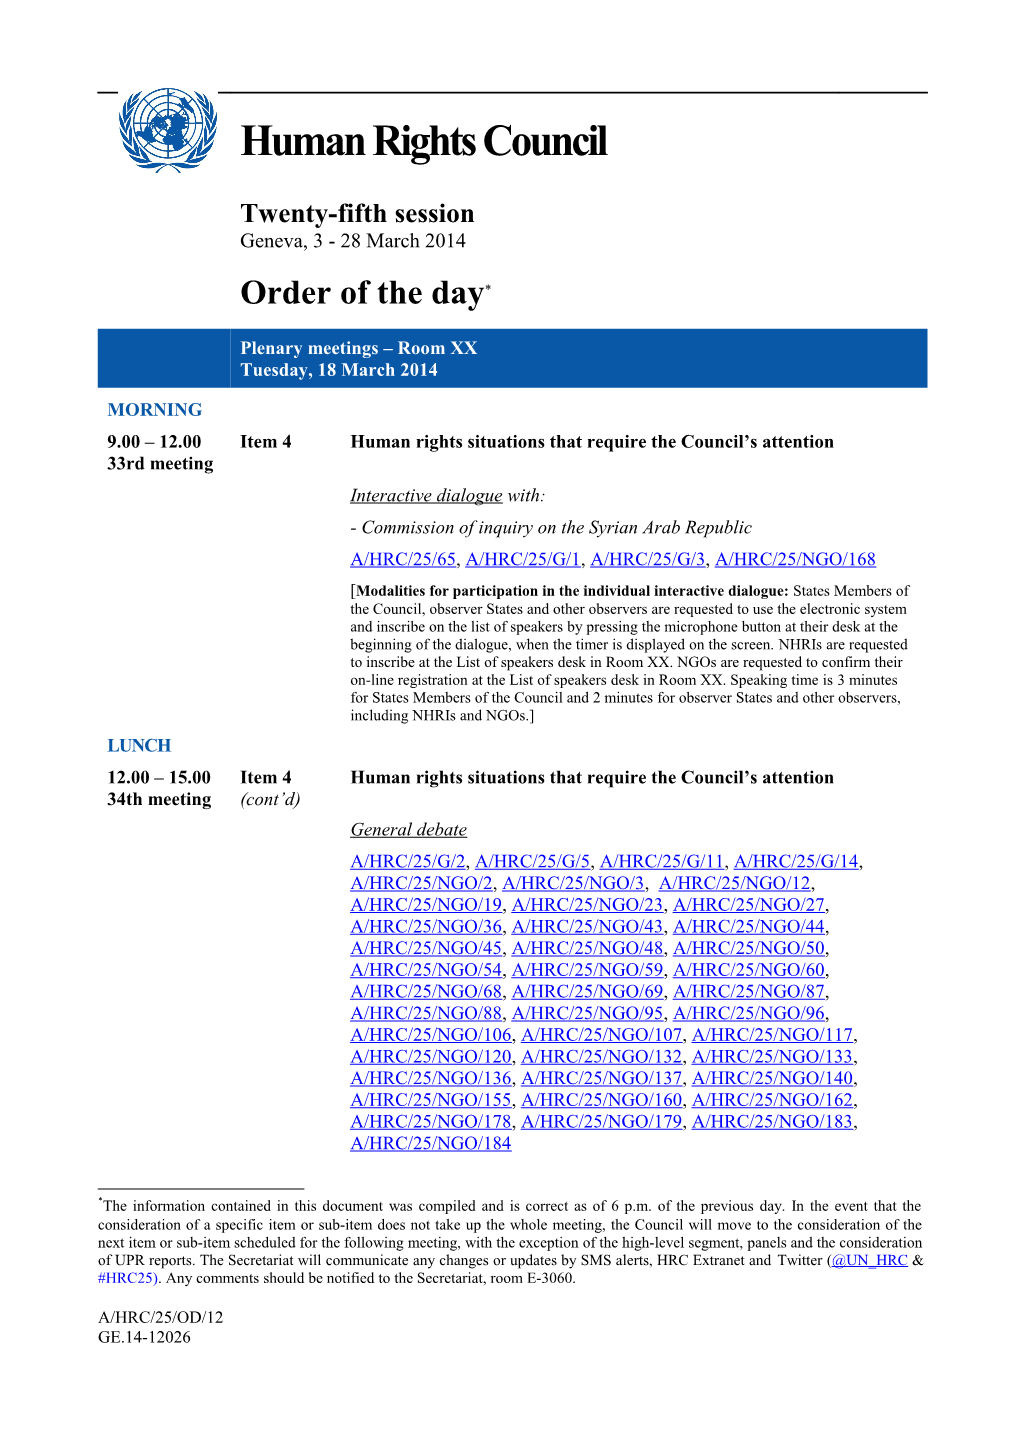 Order of the Day, 18 March 2014